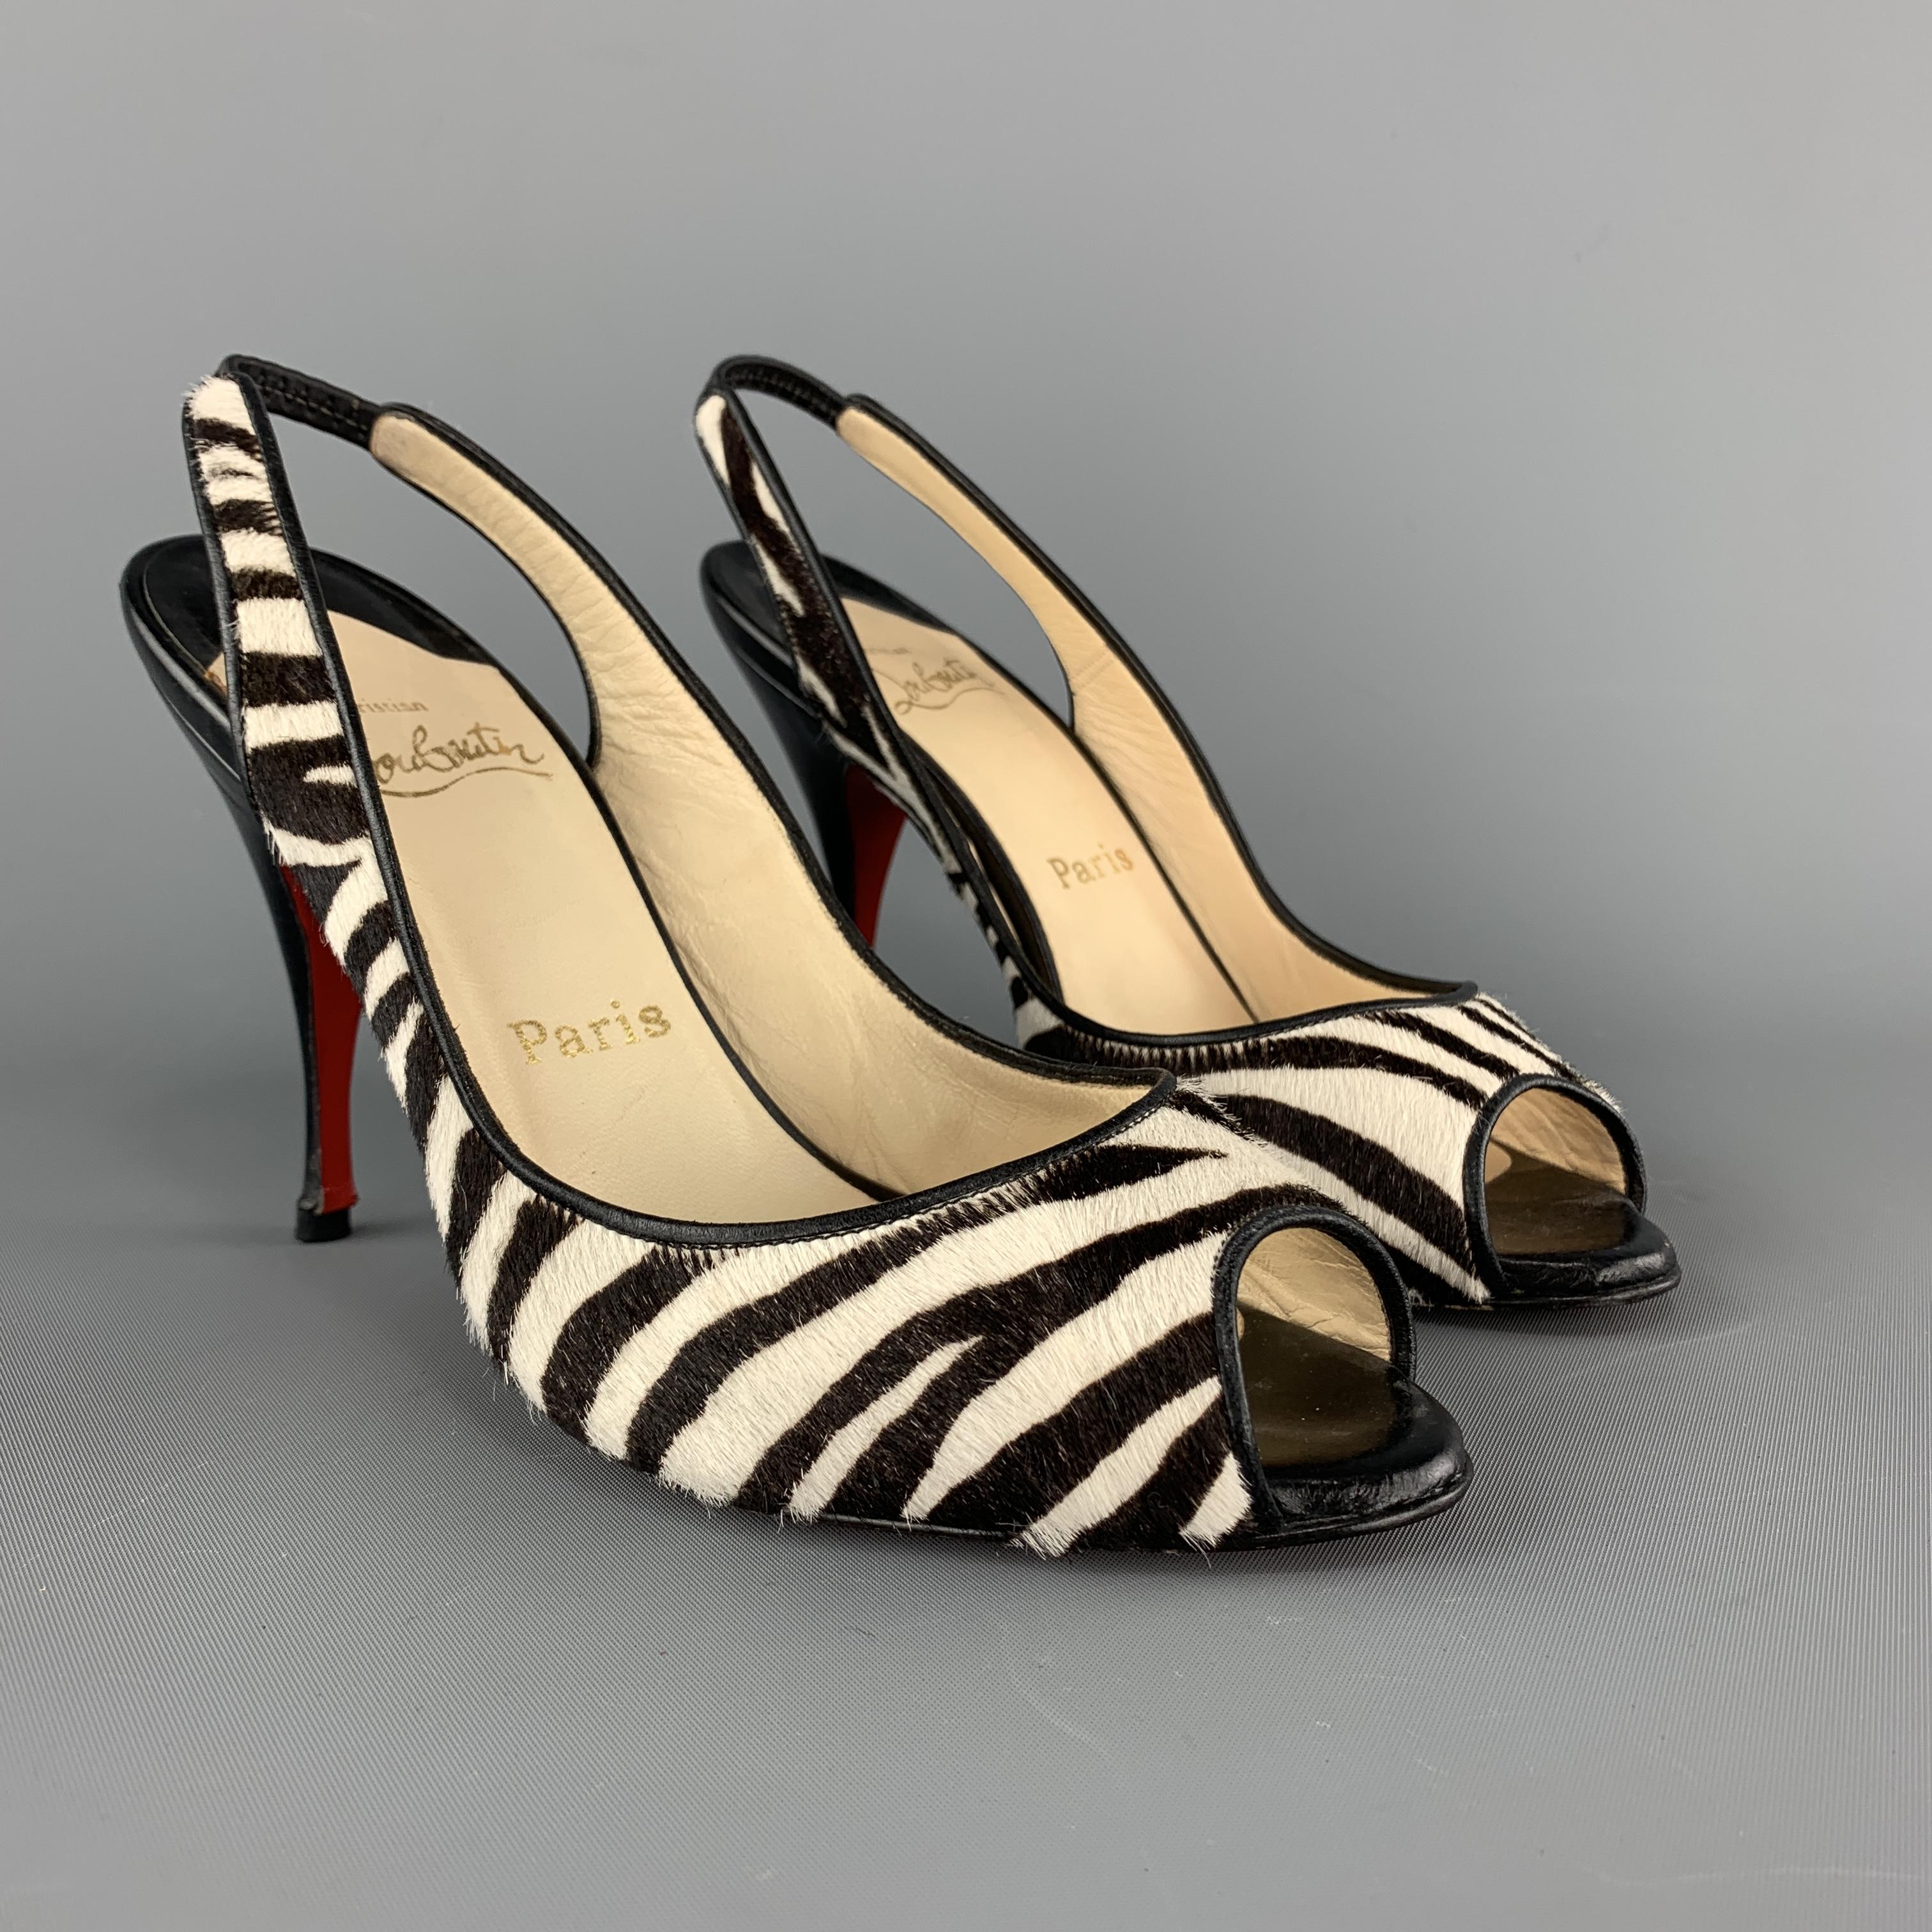 CHRISTIAN LOUBOUTIN pumps come in black and white zebra print calf hair leather with a sling back, peep toe, and tapered heel. Made in Italy.

Good Pre-Owned Condition.
Marked: IT 37

Heel: 4.25 in.